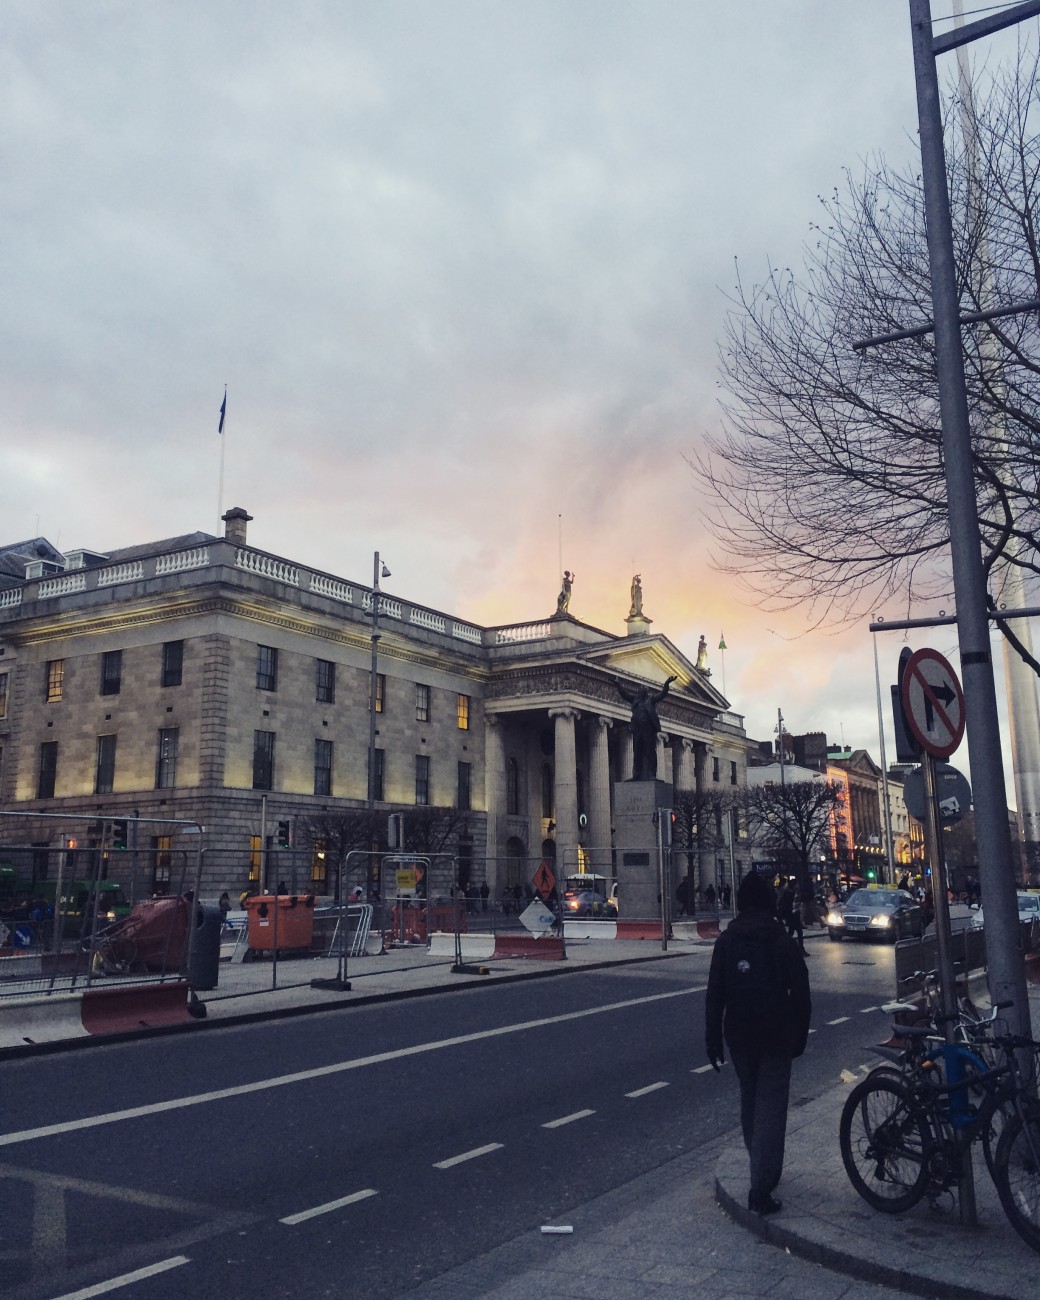 Fine evening, O'Connell Street